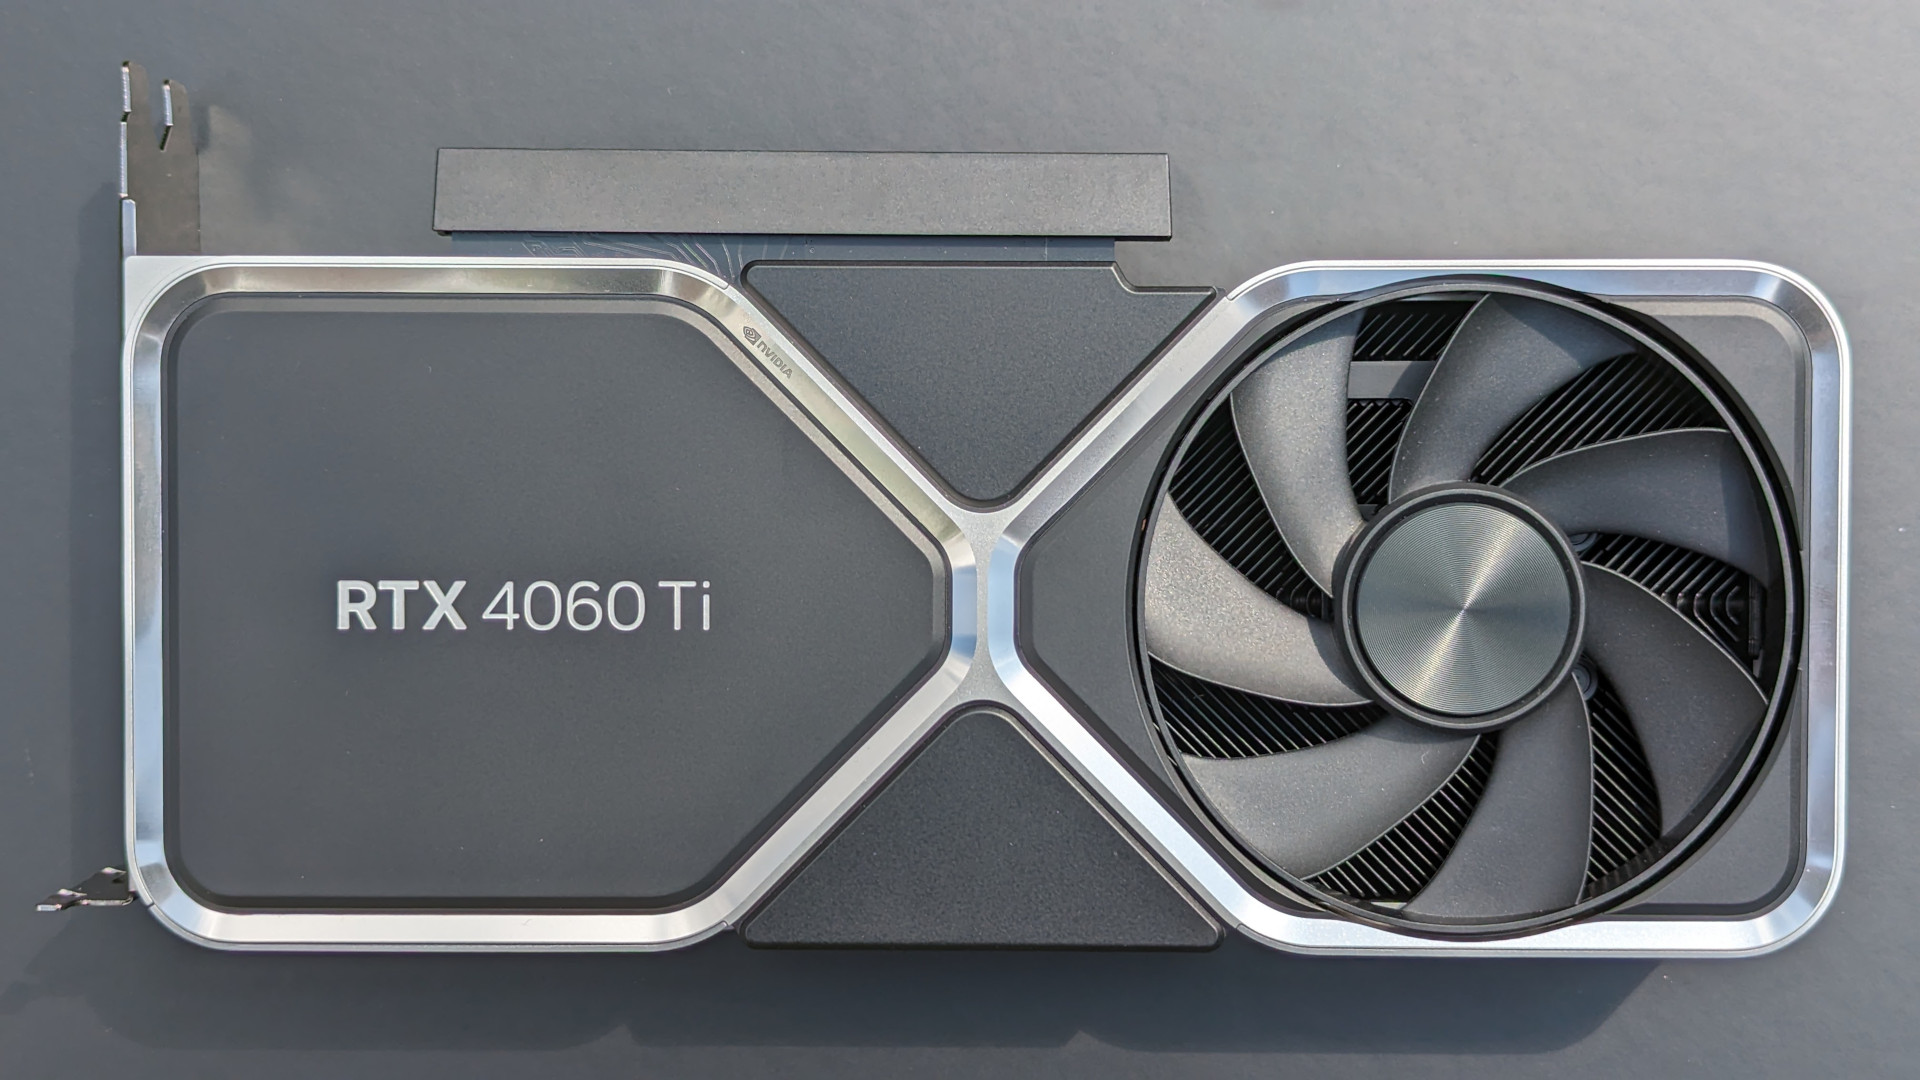 Nvidia GeForce RTX 4060 Ti 8GB review: The graphics card against a black background